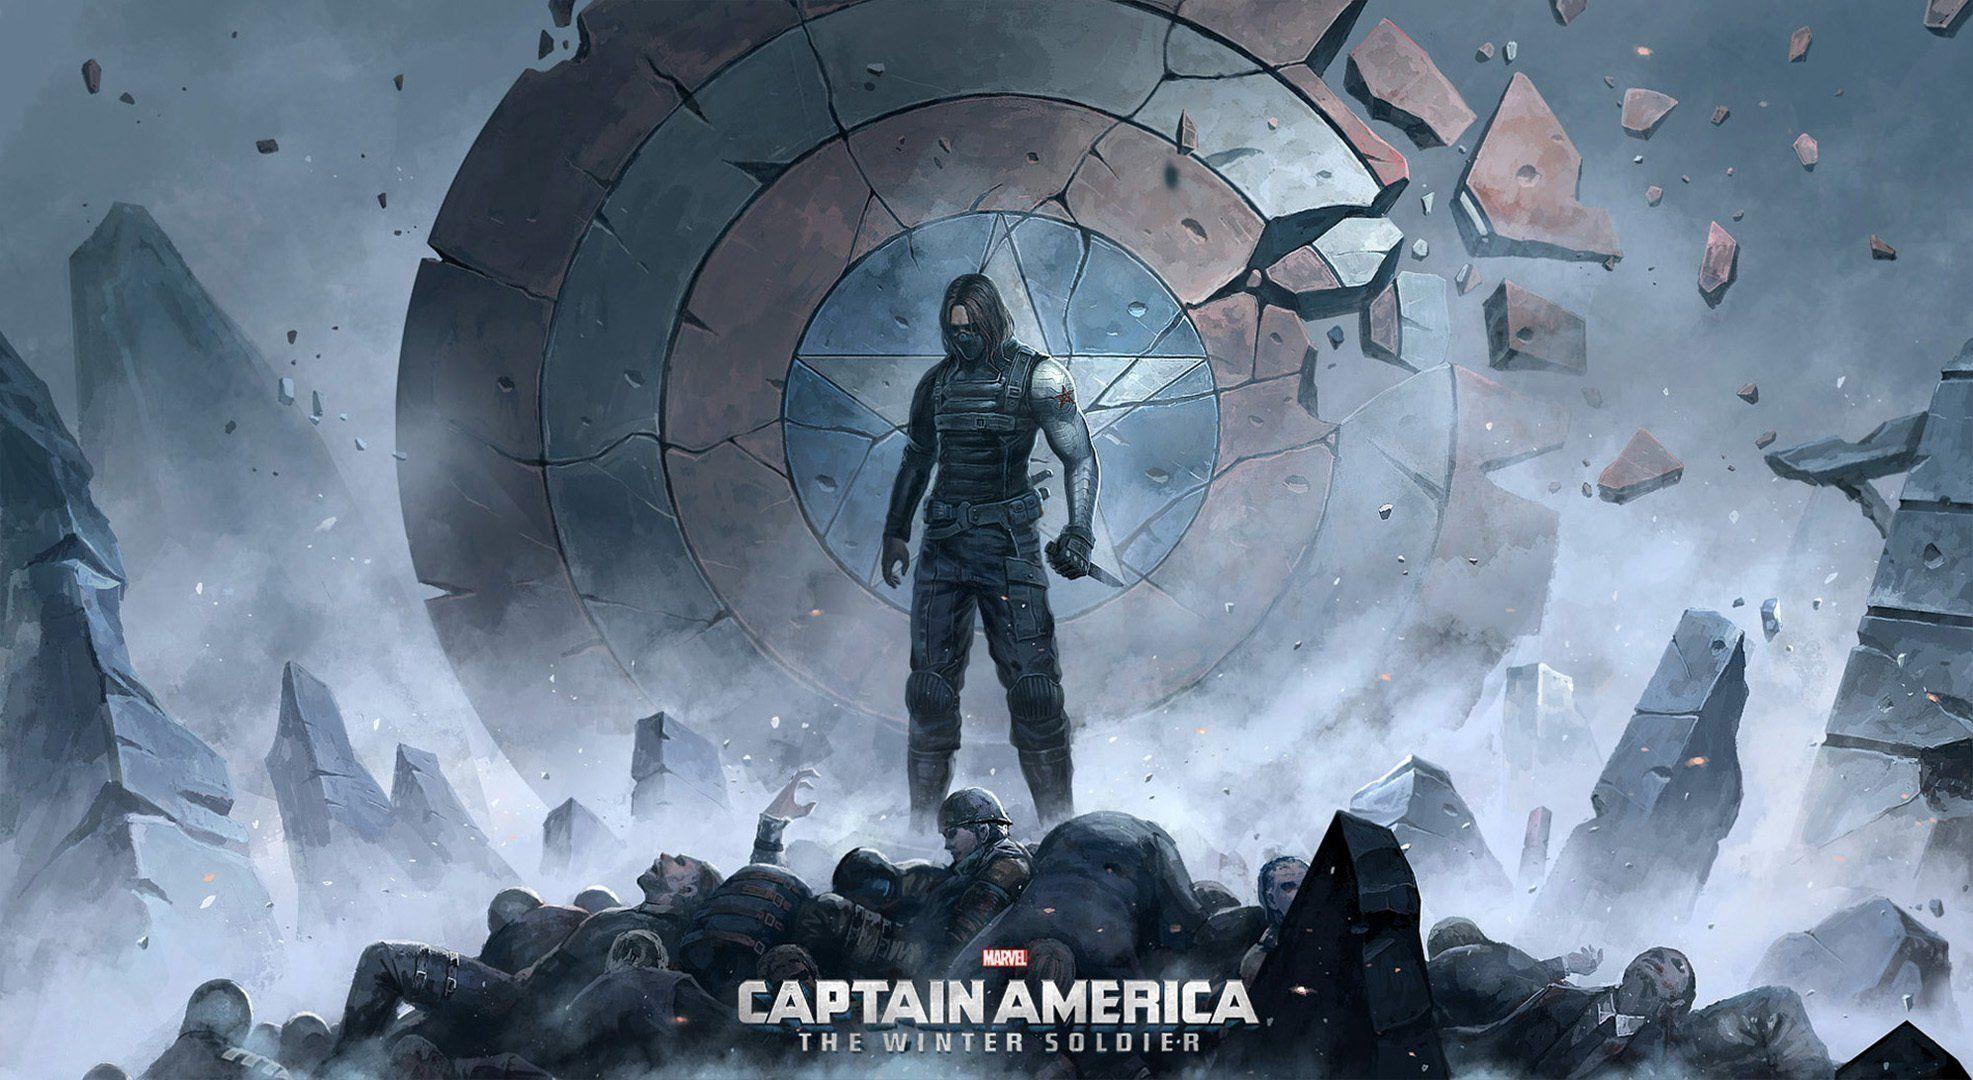 Wallpaper captain america the winter soldier, 2014, art, winter soldier, bucky barnes, the winter soldier, 2014, movies, 1920x1080, movies - Bucky Barnes